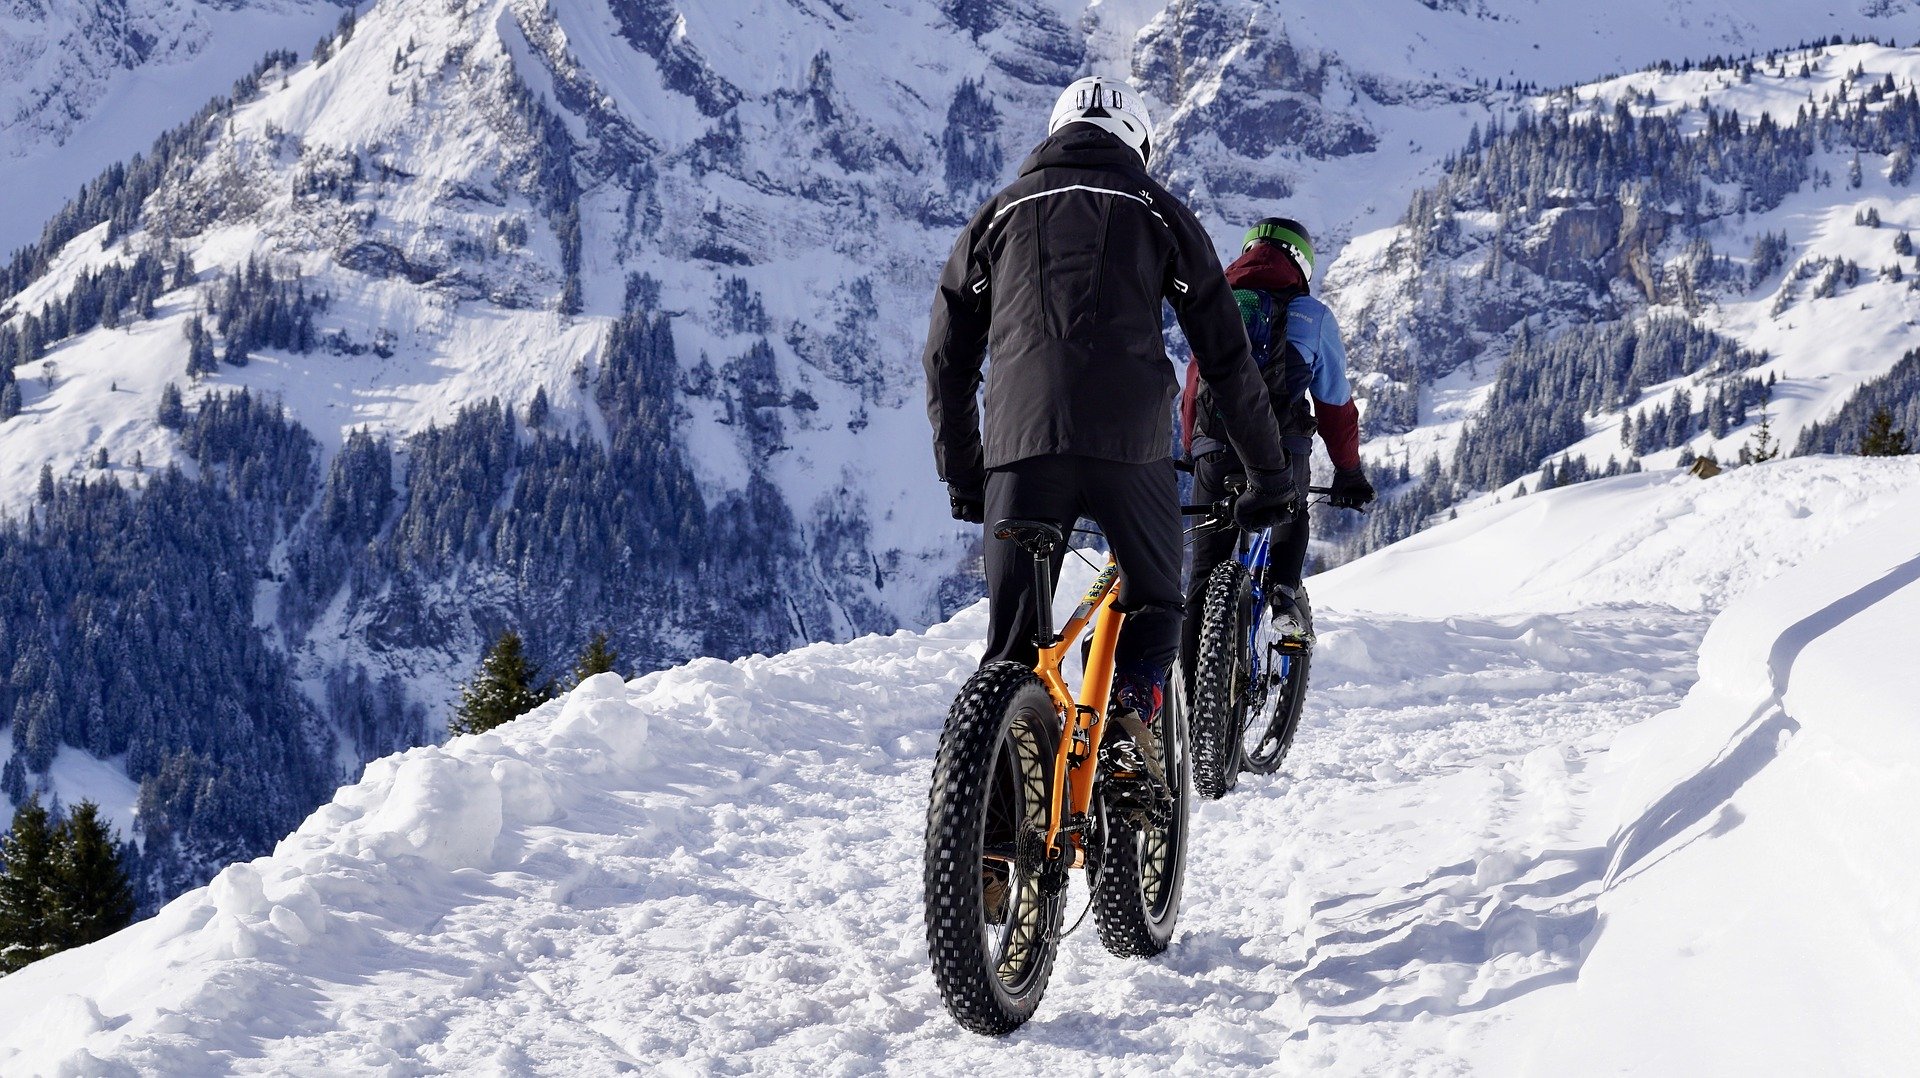 fatbiking is just one of the best big bear activities